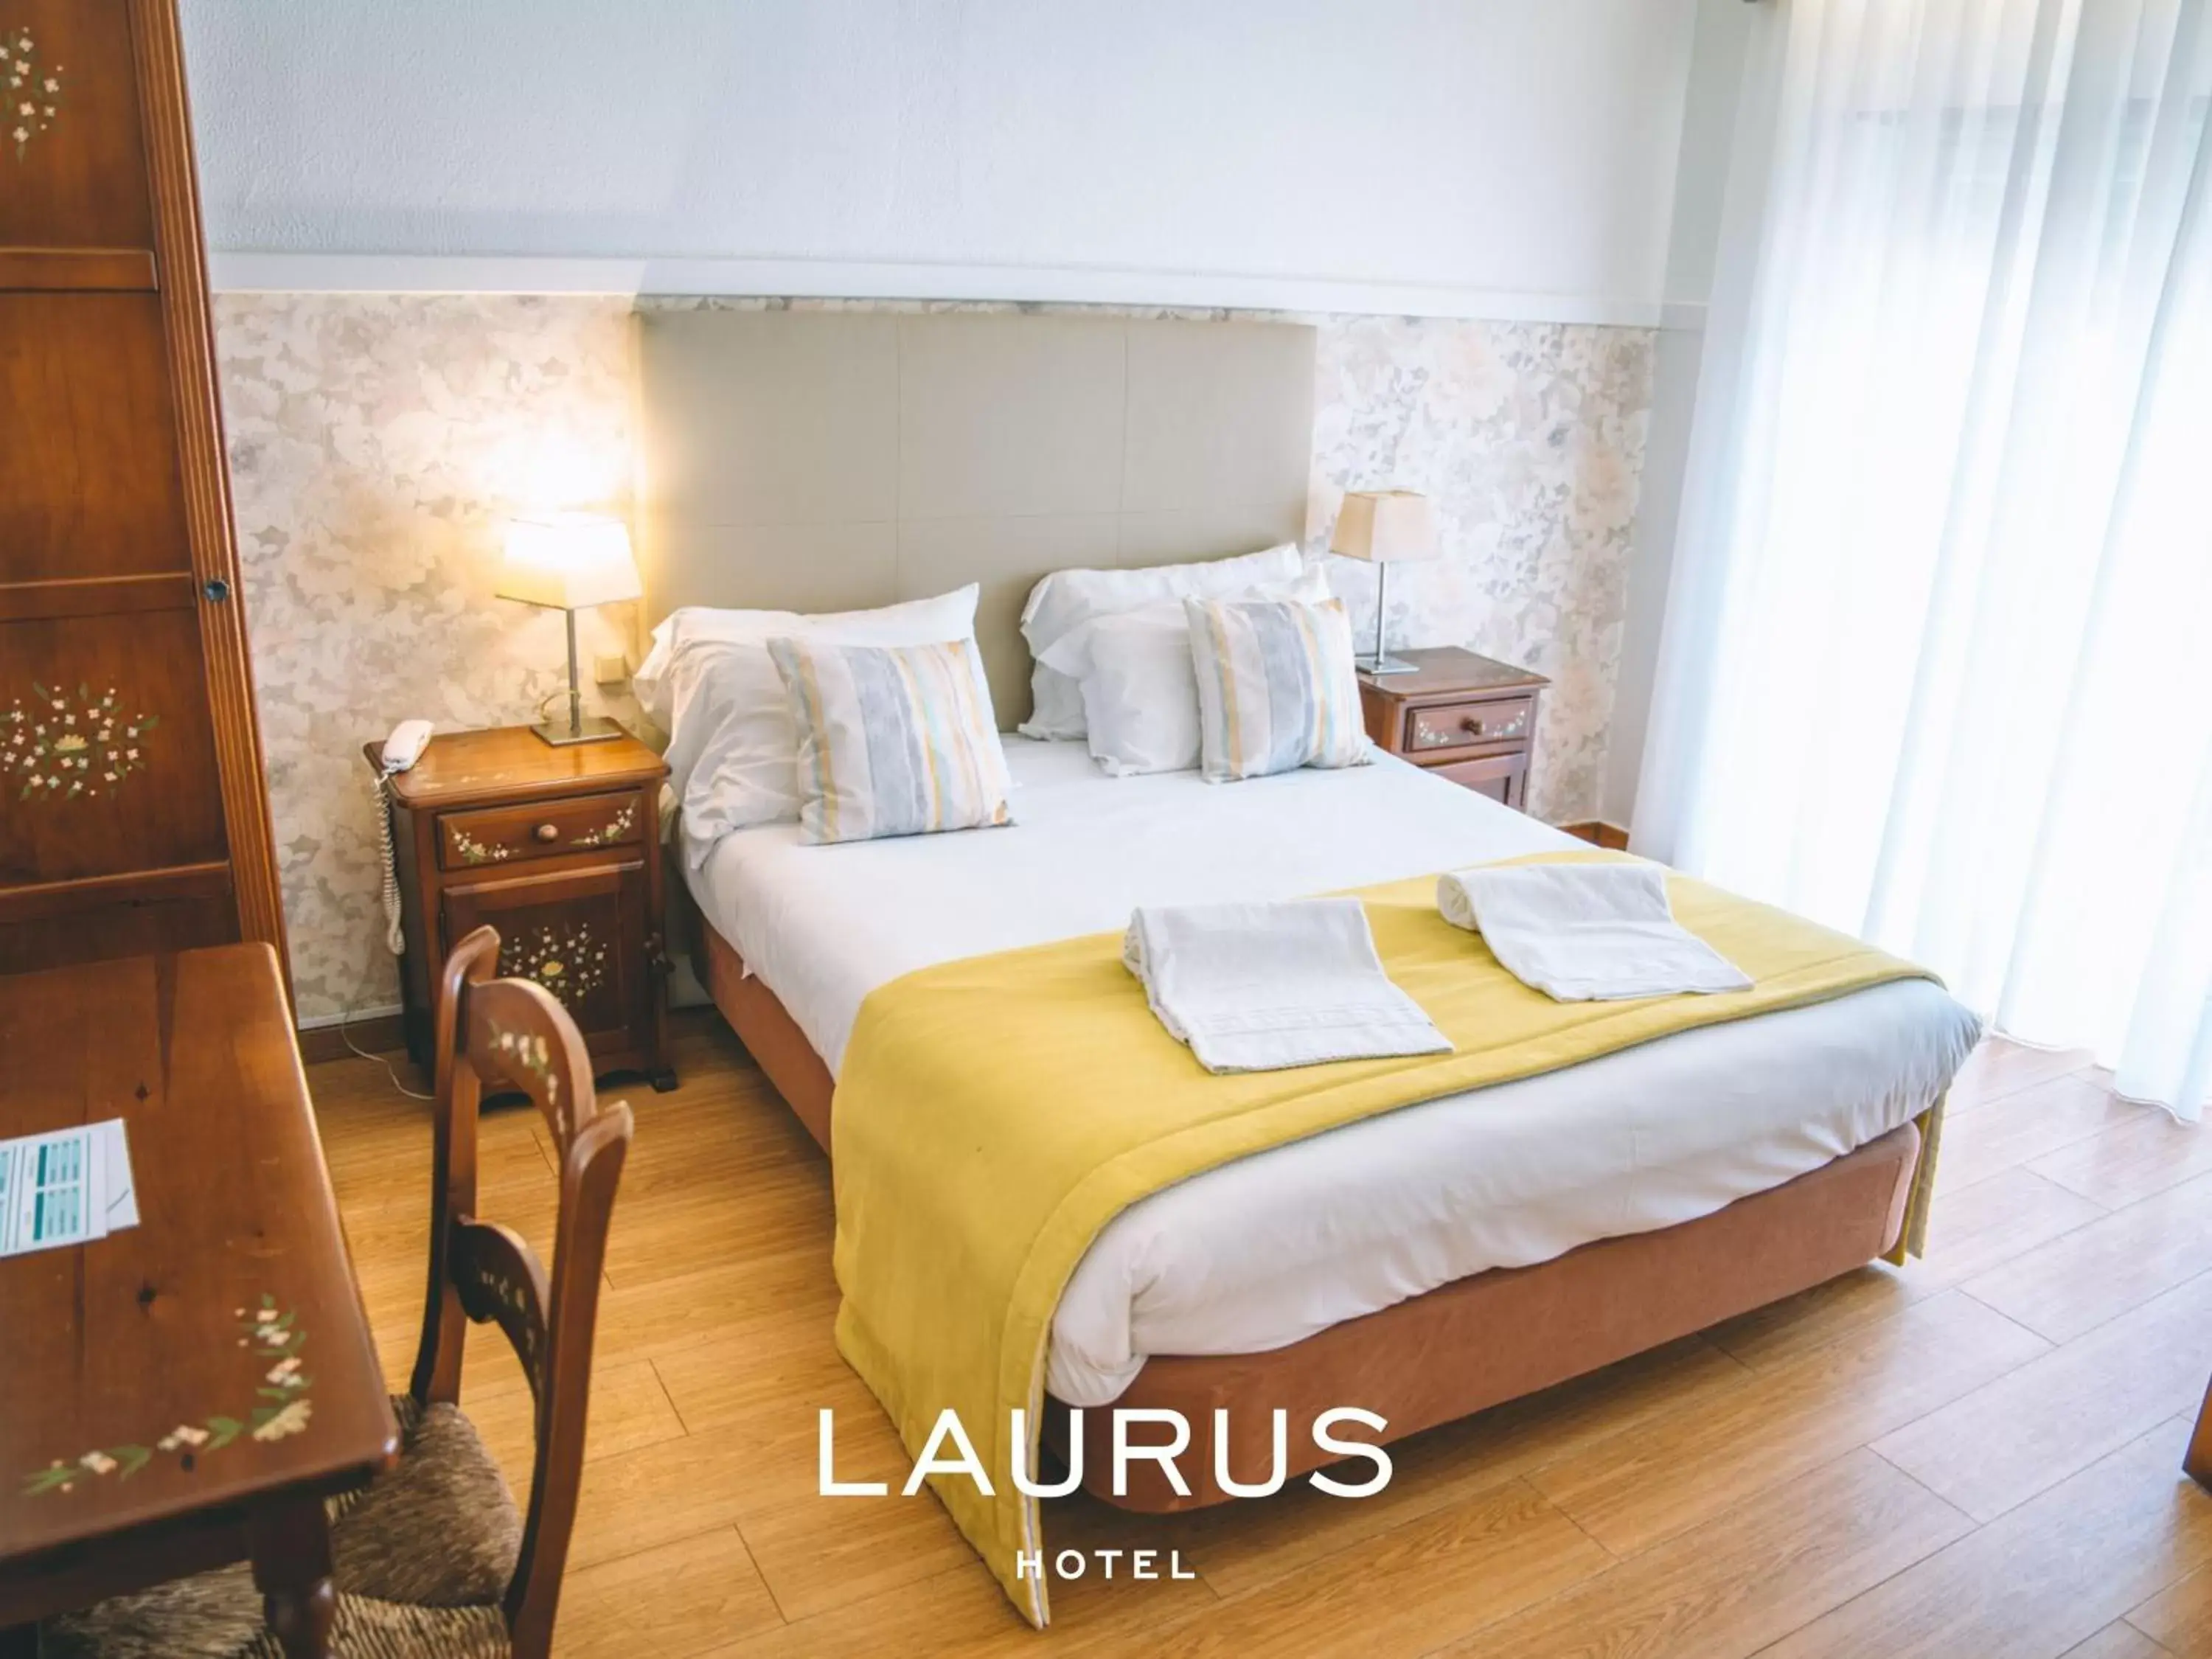 Double Room with Bath in Laurus Hotel